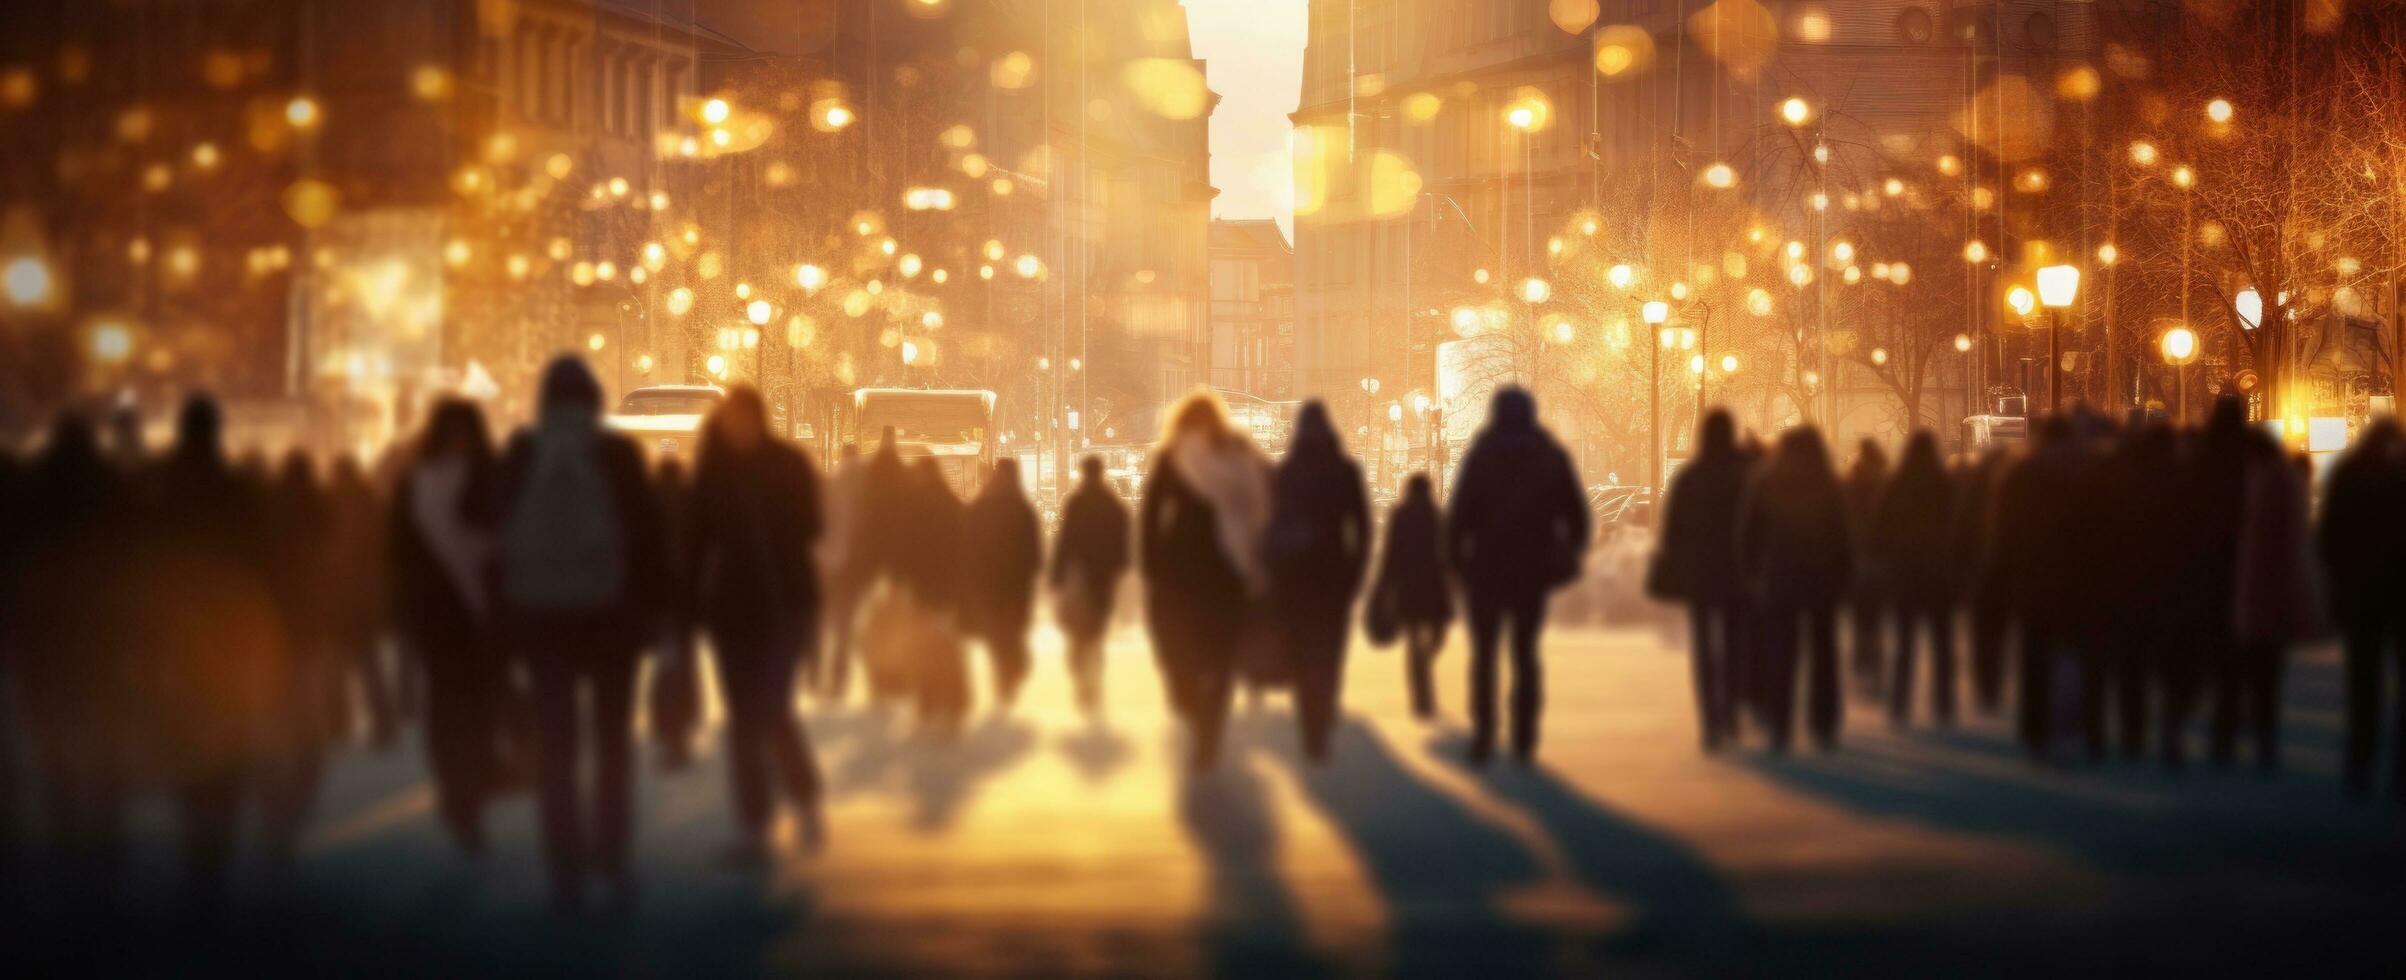 A group of people walking in a city evening photo